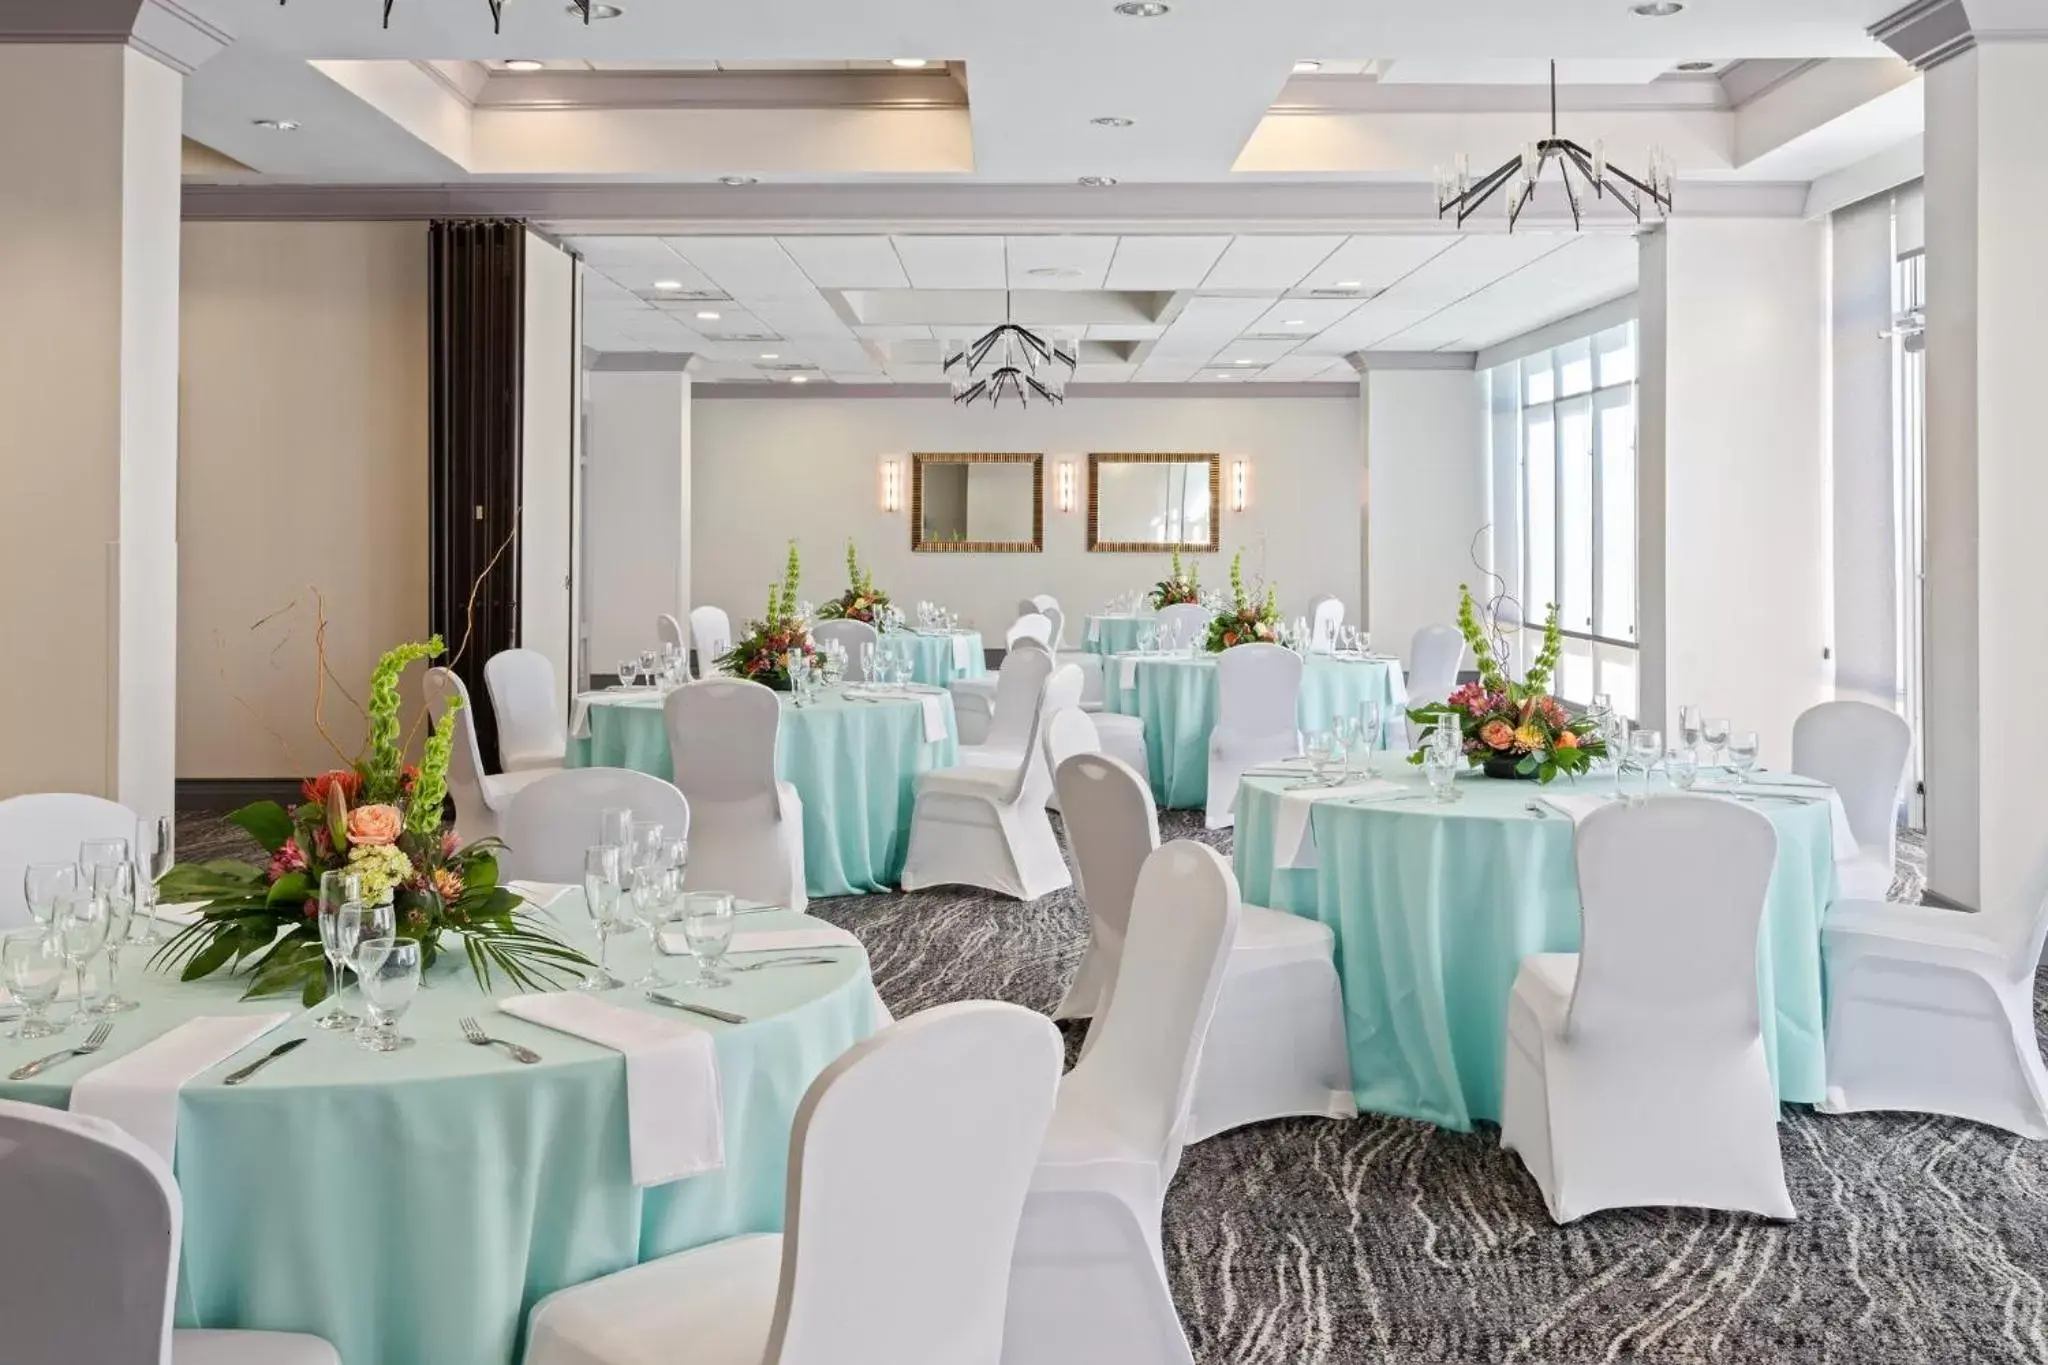 Meeting/conference room, Banquet Facilities in Crowne Plaza Melbourne-Oceanfront, an IHG Hotel